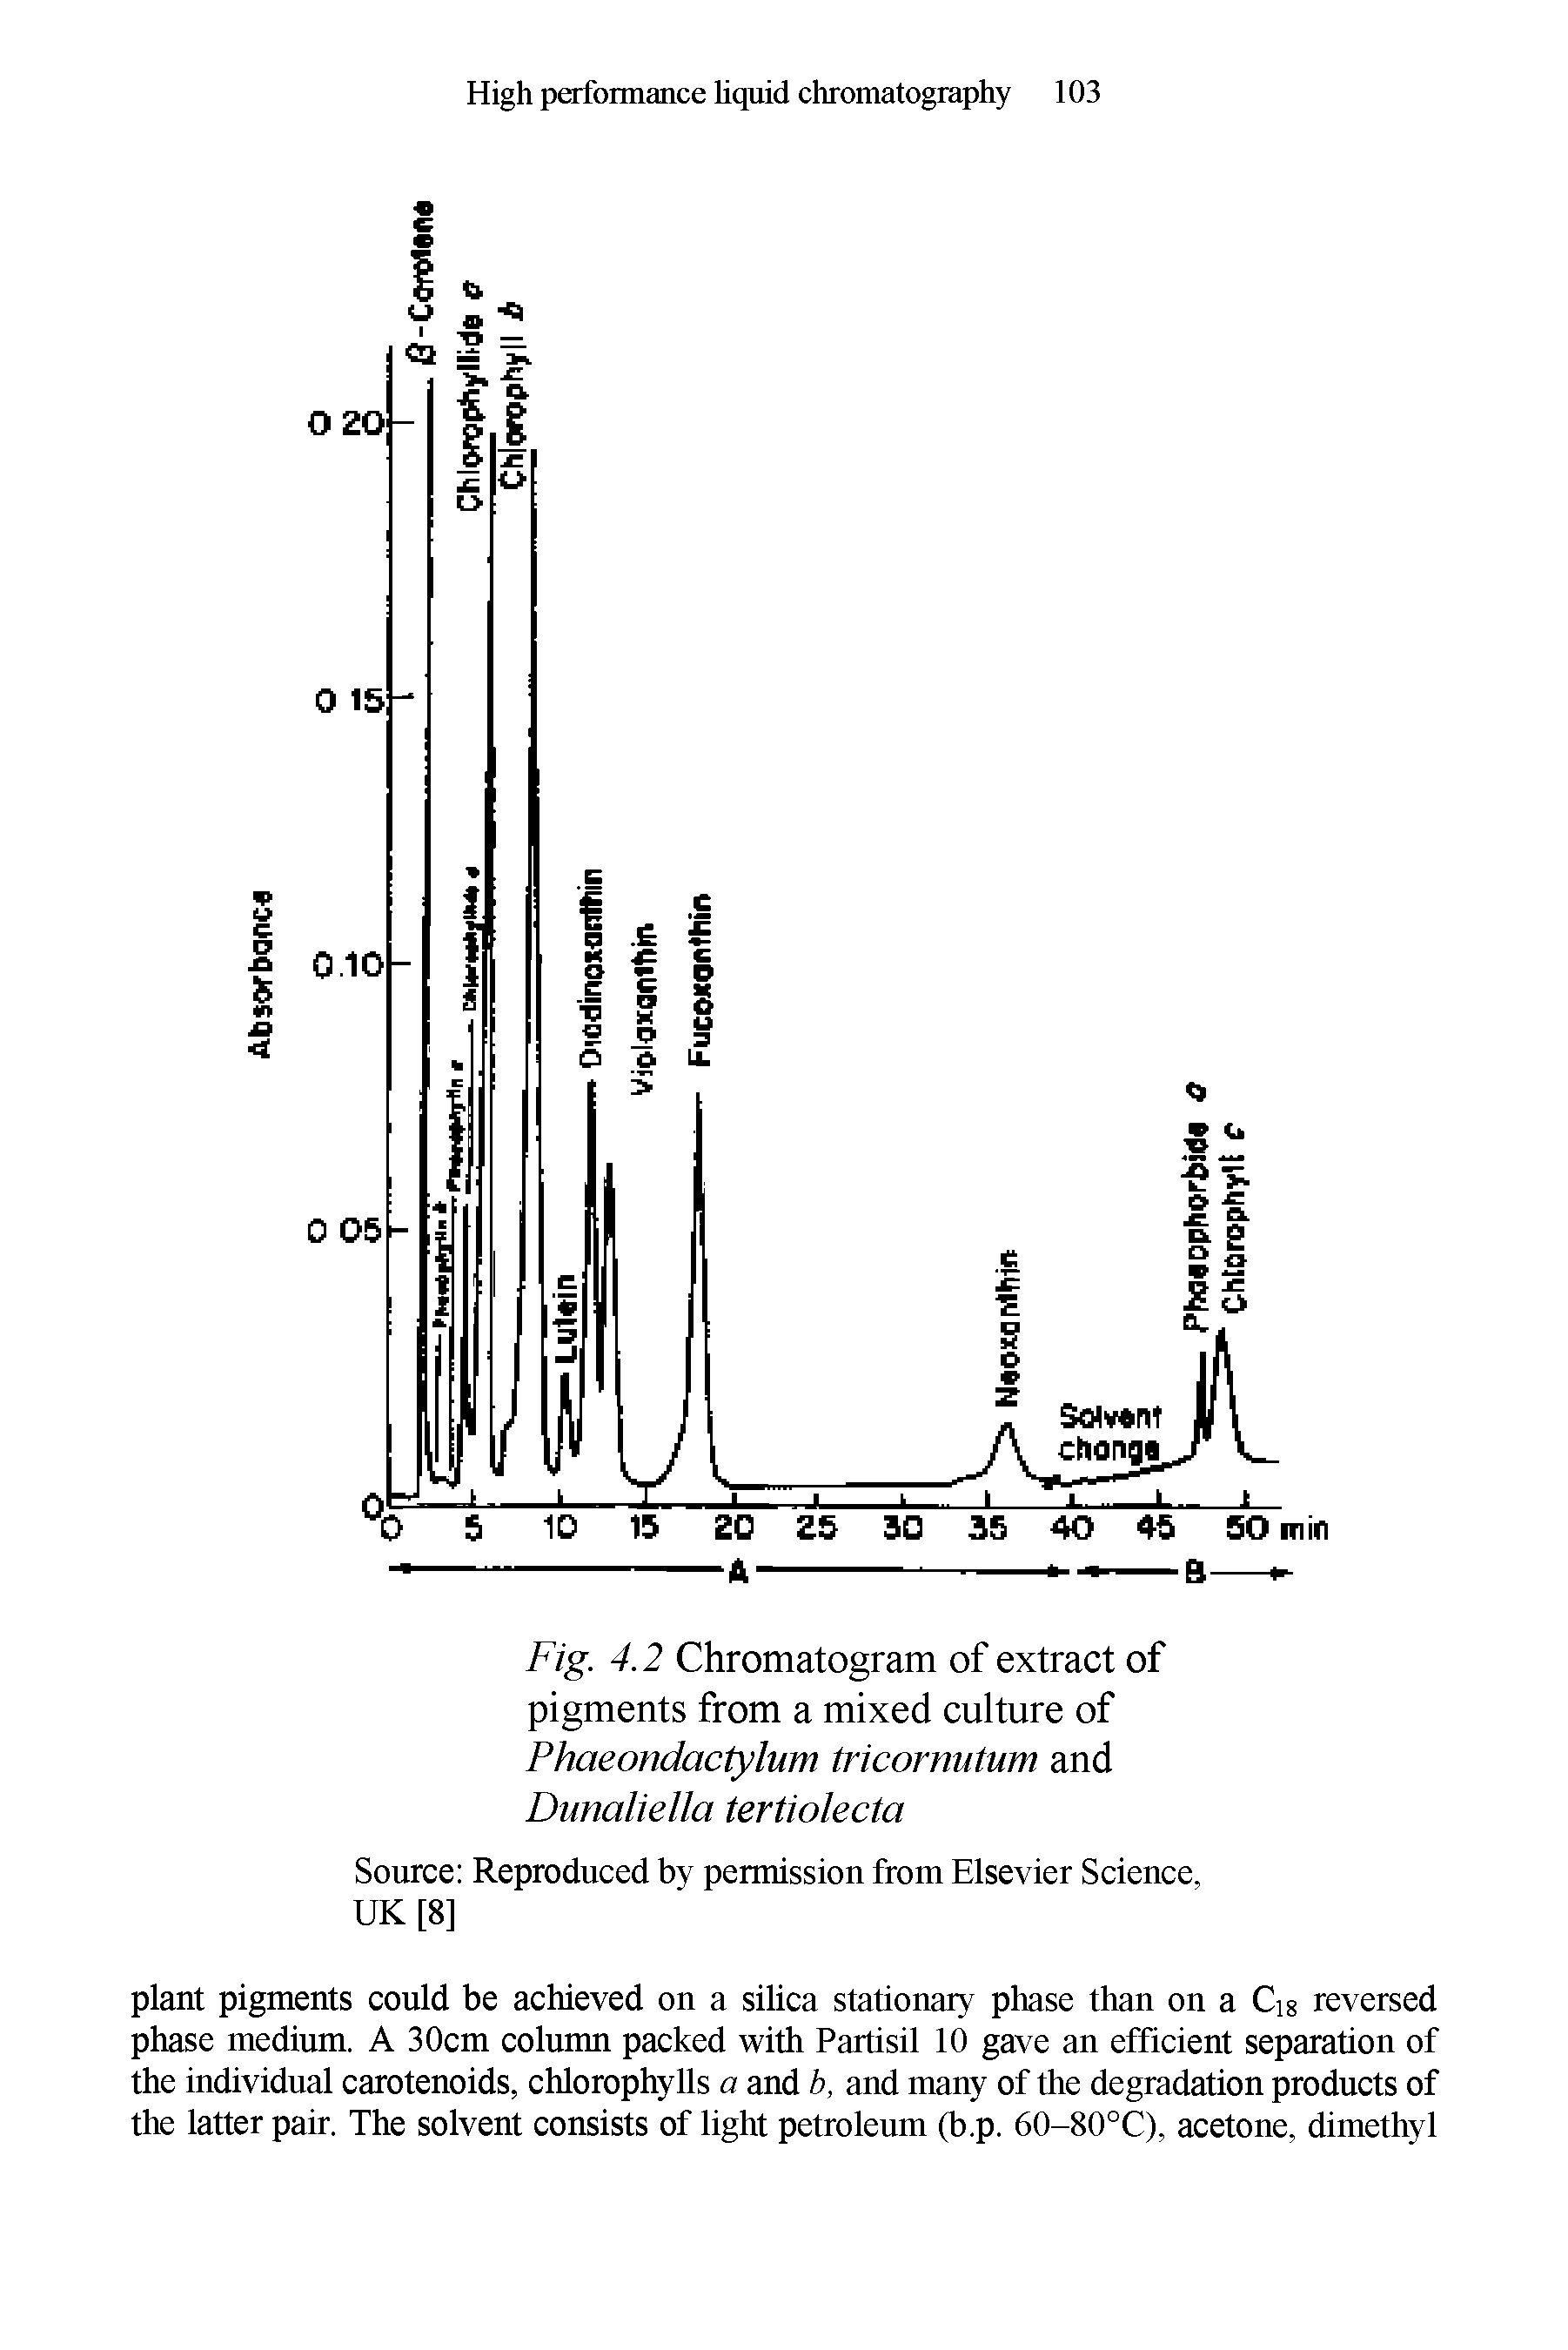 Fig. 4.2 Chromatogram of extract of pigments from a mixed culture of Phaeondactylum tricornutum and Dunaliella tertiolecta...